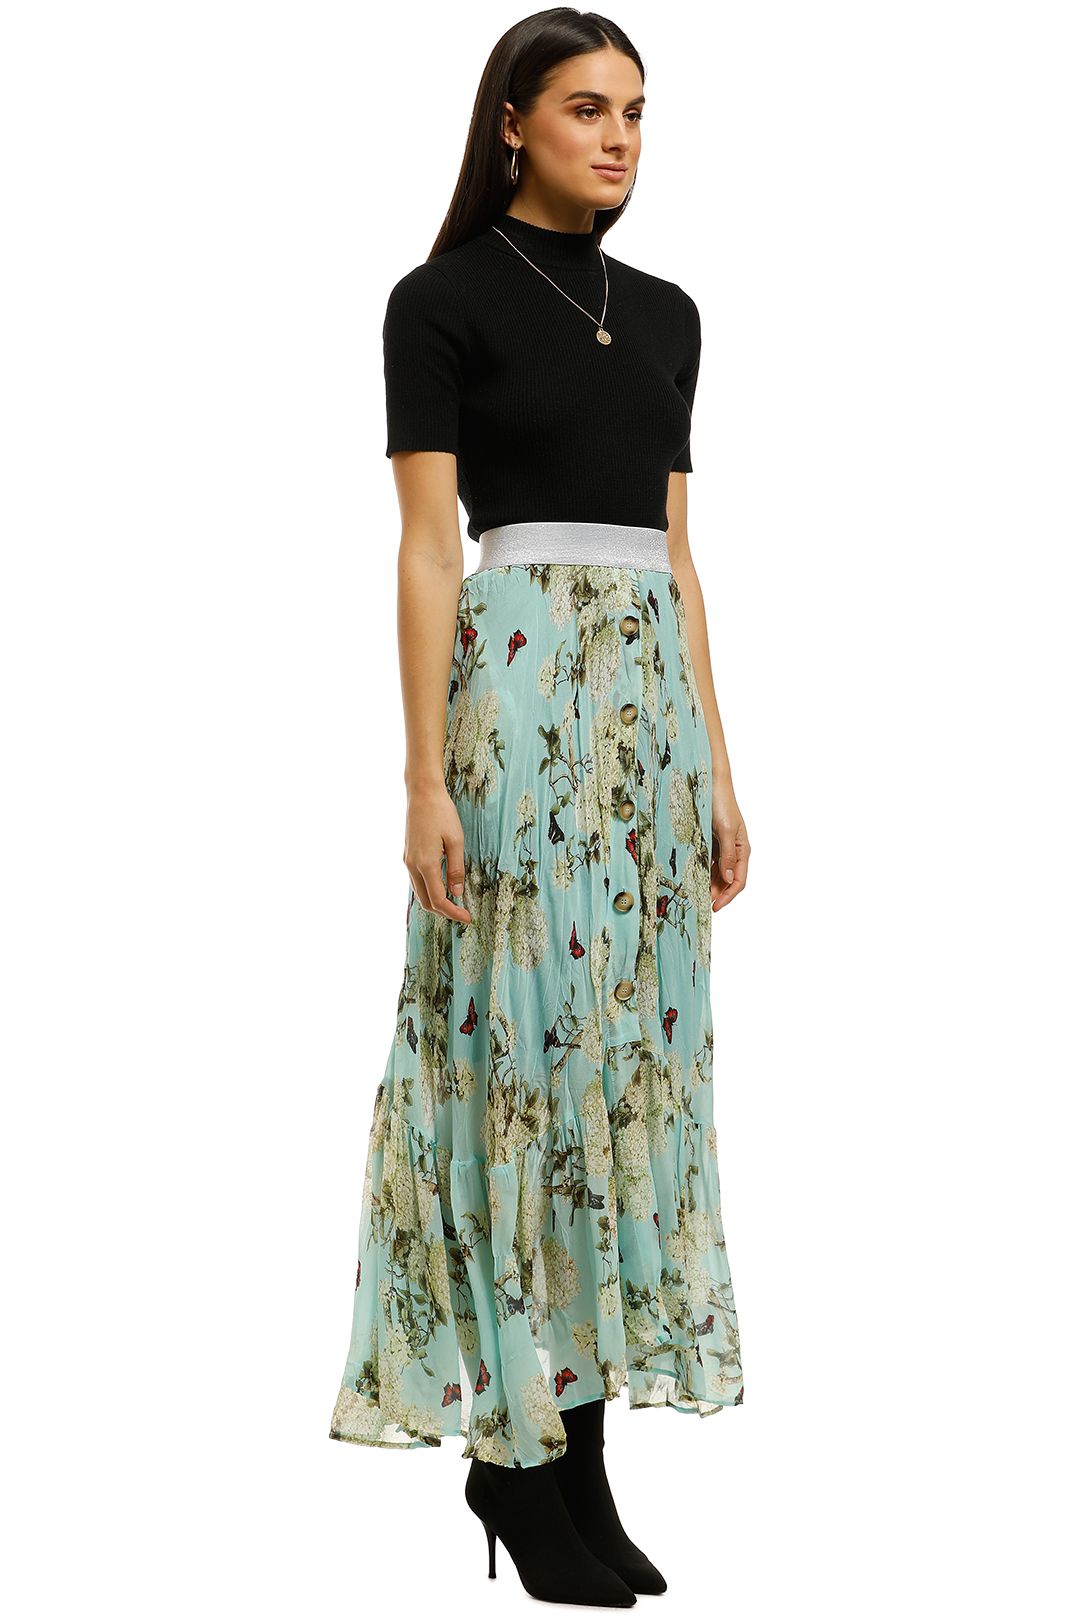 Curate-by-Trelise-Cooper-Long-Heart-Skirt-Floral-Side